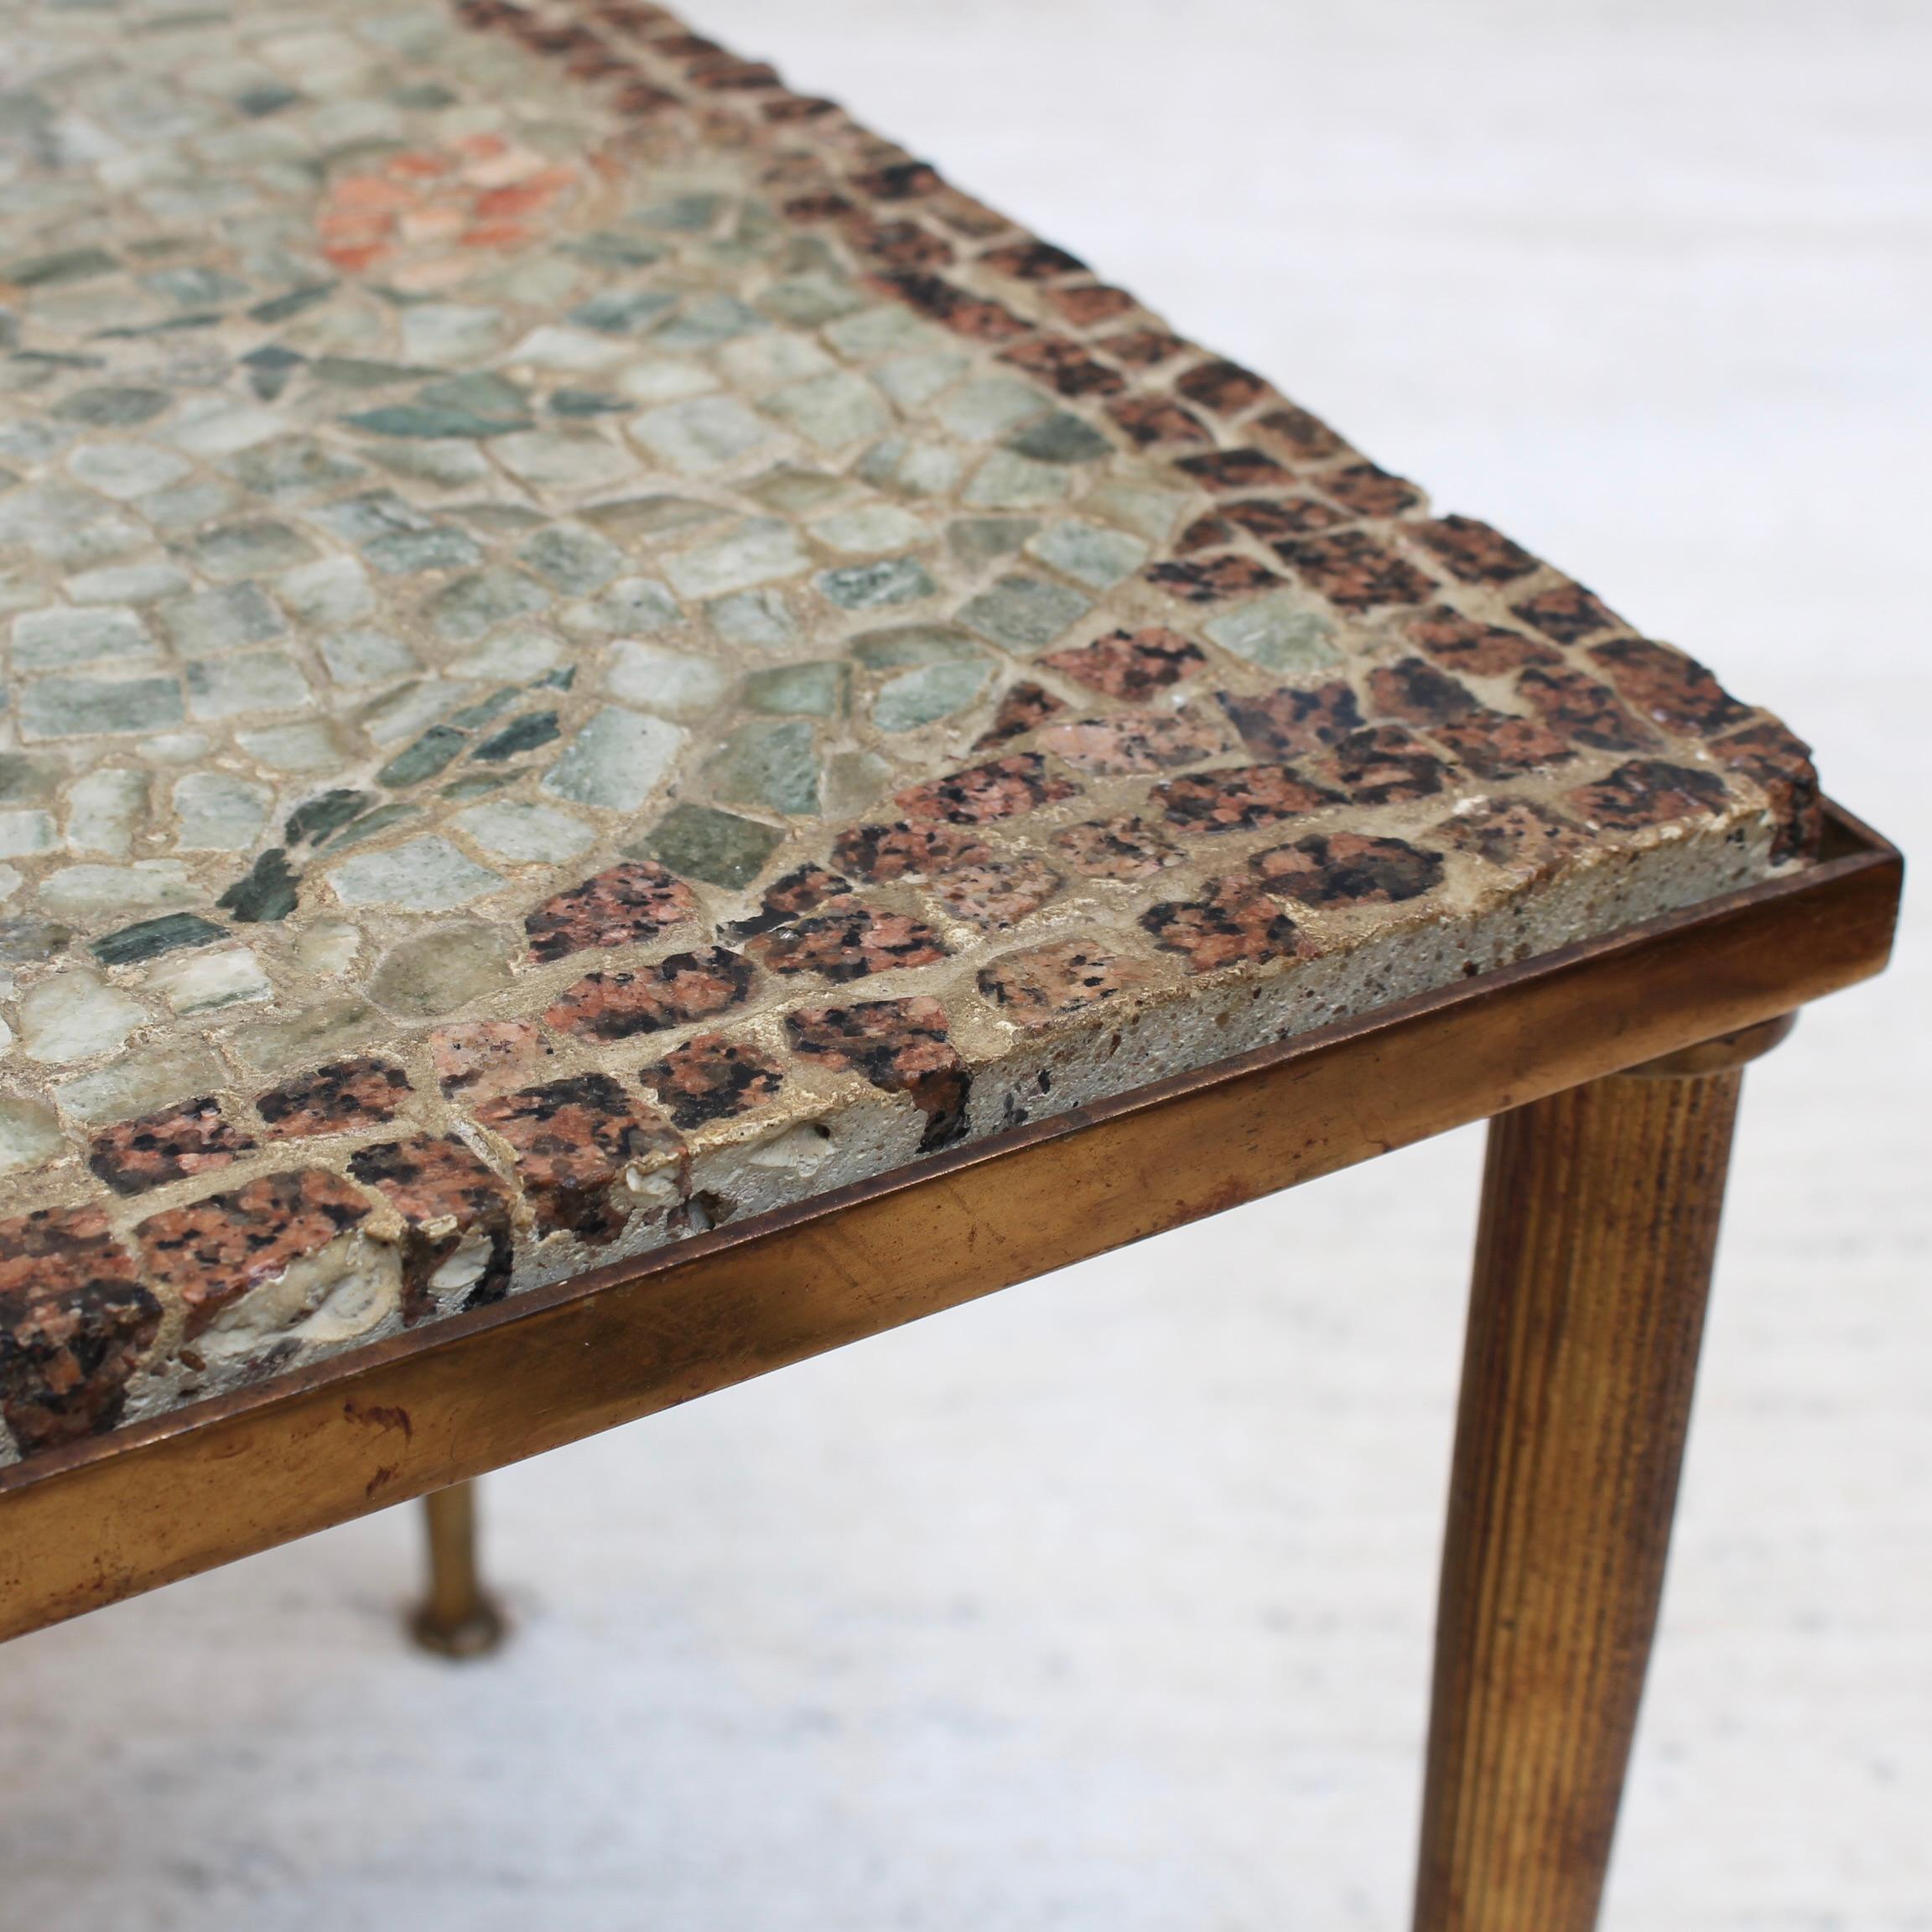 Vintage Low Table with Italian Style Mosaic Top, 'circa 1950s' For Sale 9